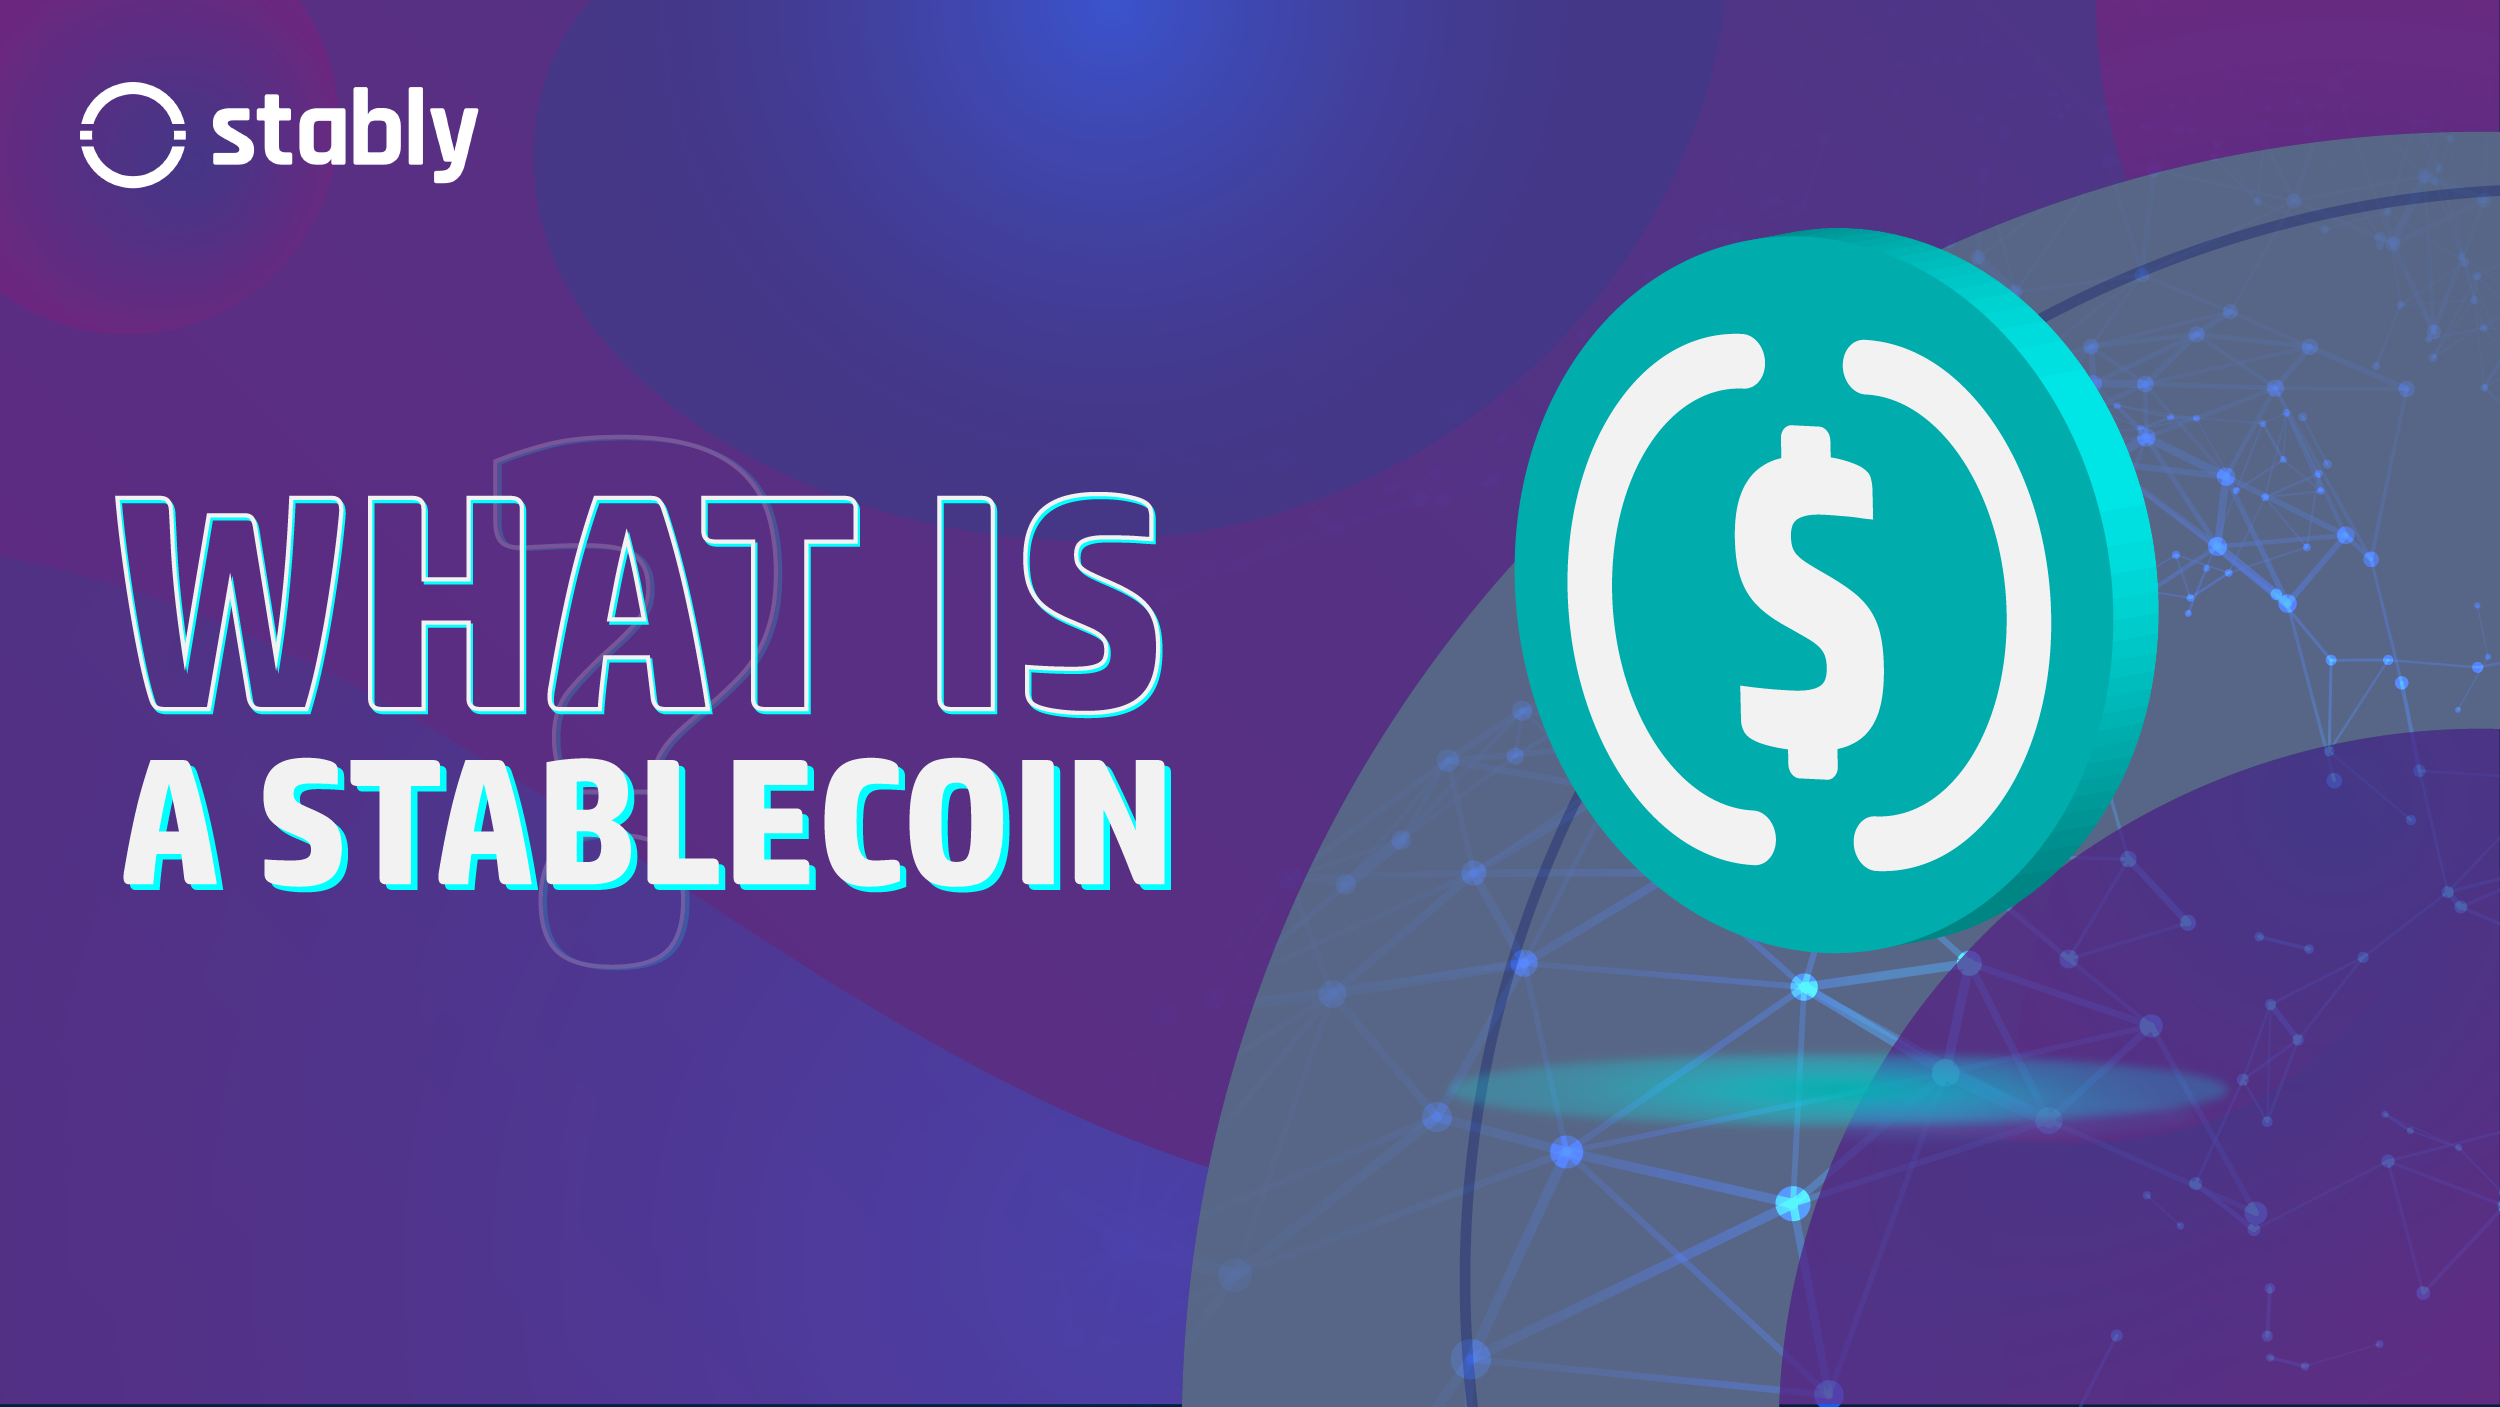 stablecoin, USD, Ethereum, blockchain, cryptocurrency